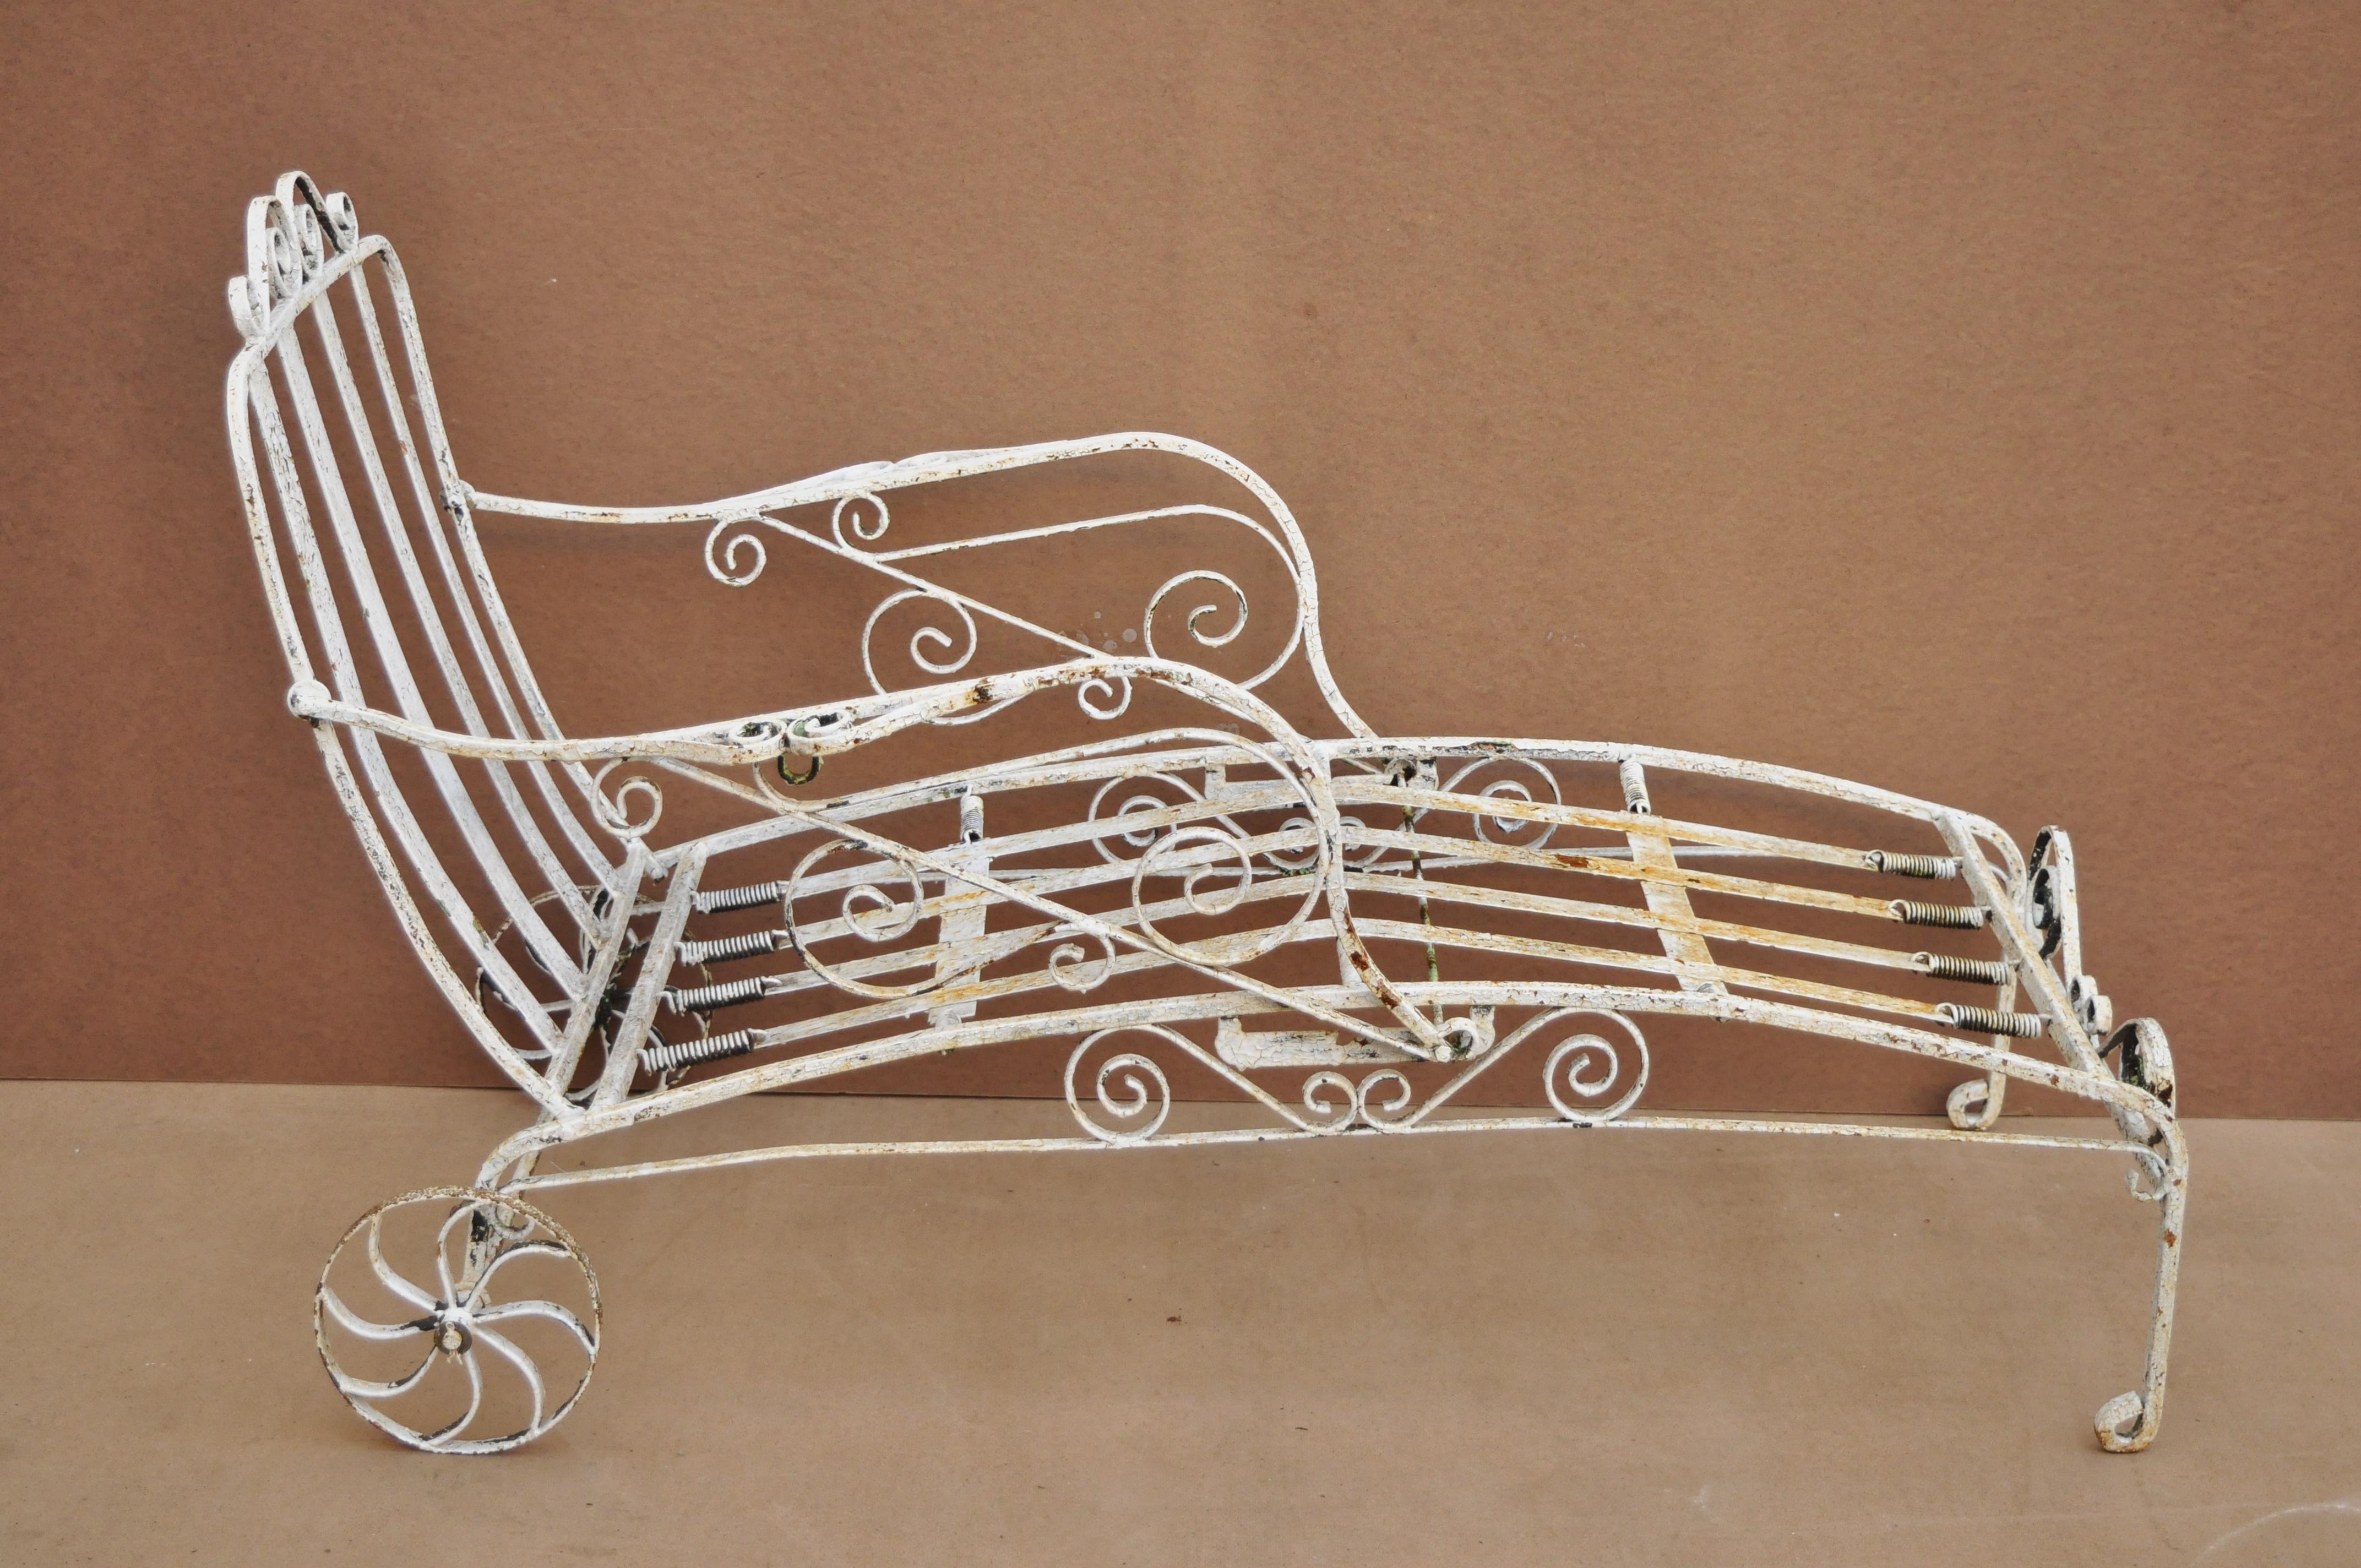 Antique Saltertini fancy wrought iron Art Nouveau reclining chaise lounge chair. Item features reclining back, rear wheels, wrought iron construction, very nice antique item, great style and form, attributed to Salterini, circa early 20th century.